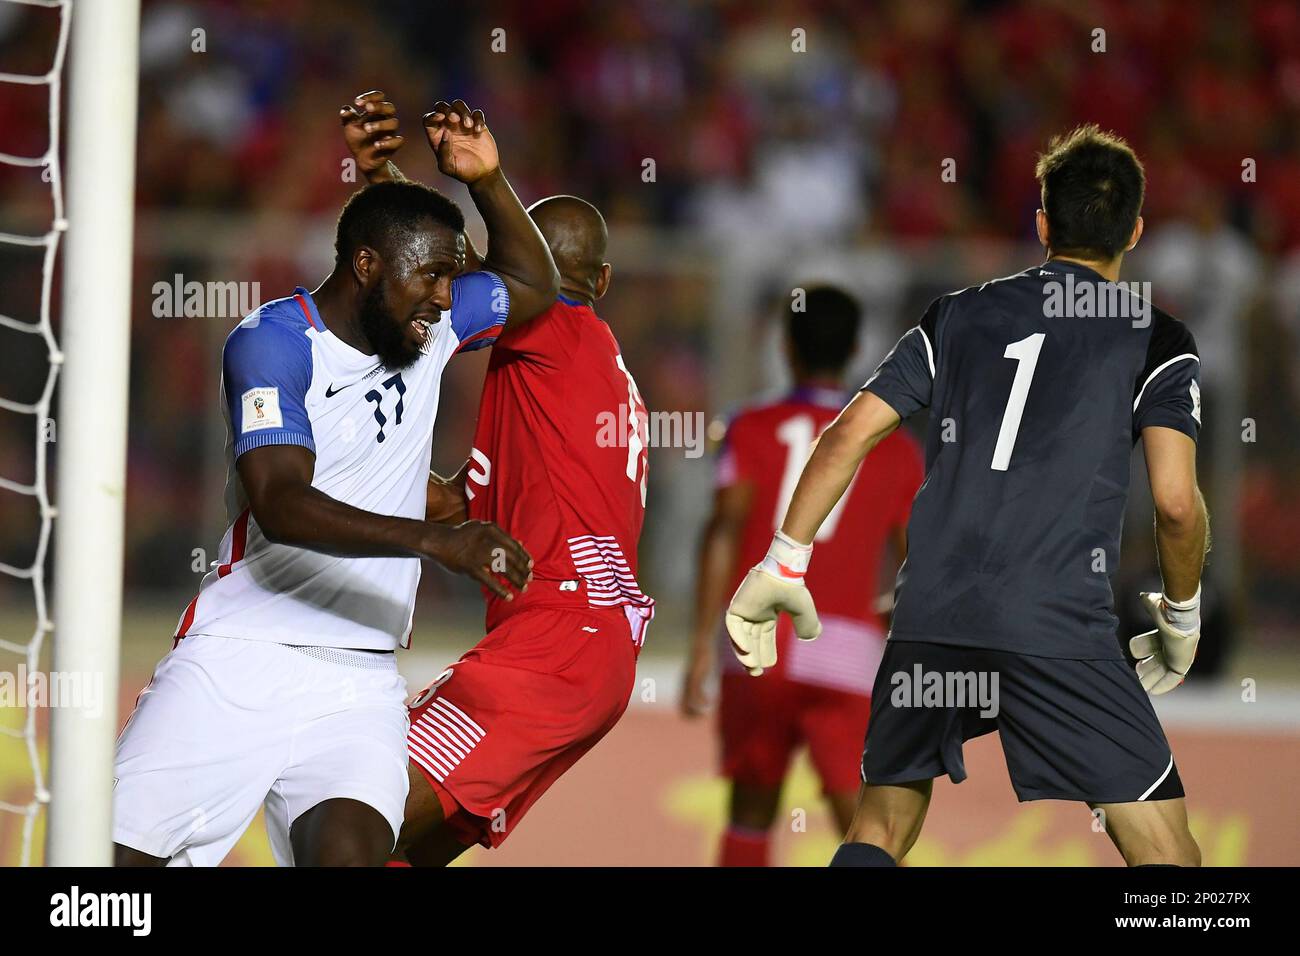 United States' forward Jozy Altidore (17) and defender Adolfo Machado (13) battles for position before a free kick during second half of a 2018 FIFA World Cup qualifying final round soccer match. Tuesday, March 28, 2017 in Panama City, Panama. United States' Panama draw 1-1. (TFV Media via AP Images) Stock Photo